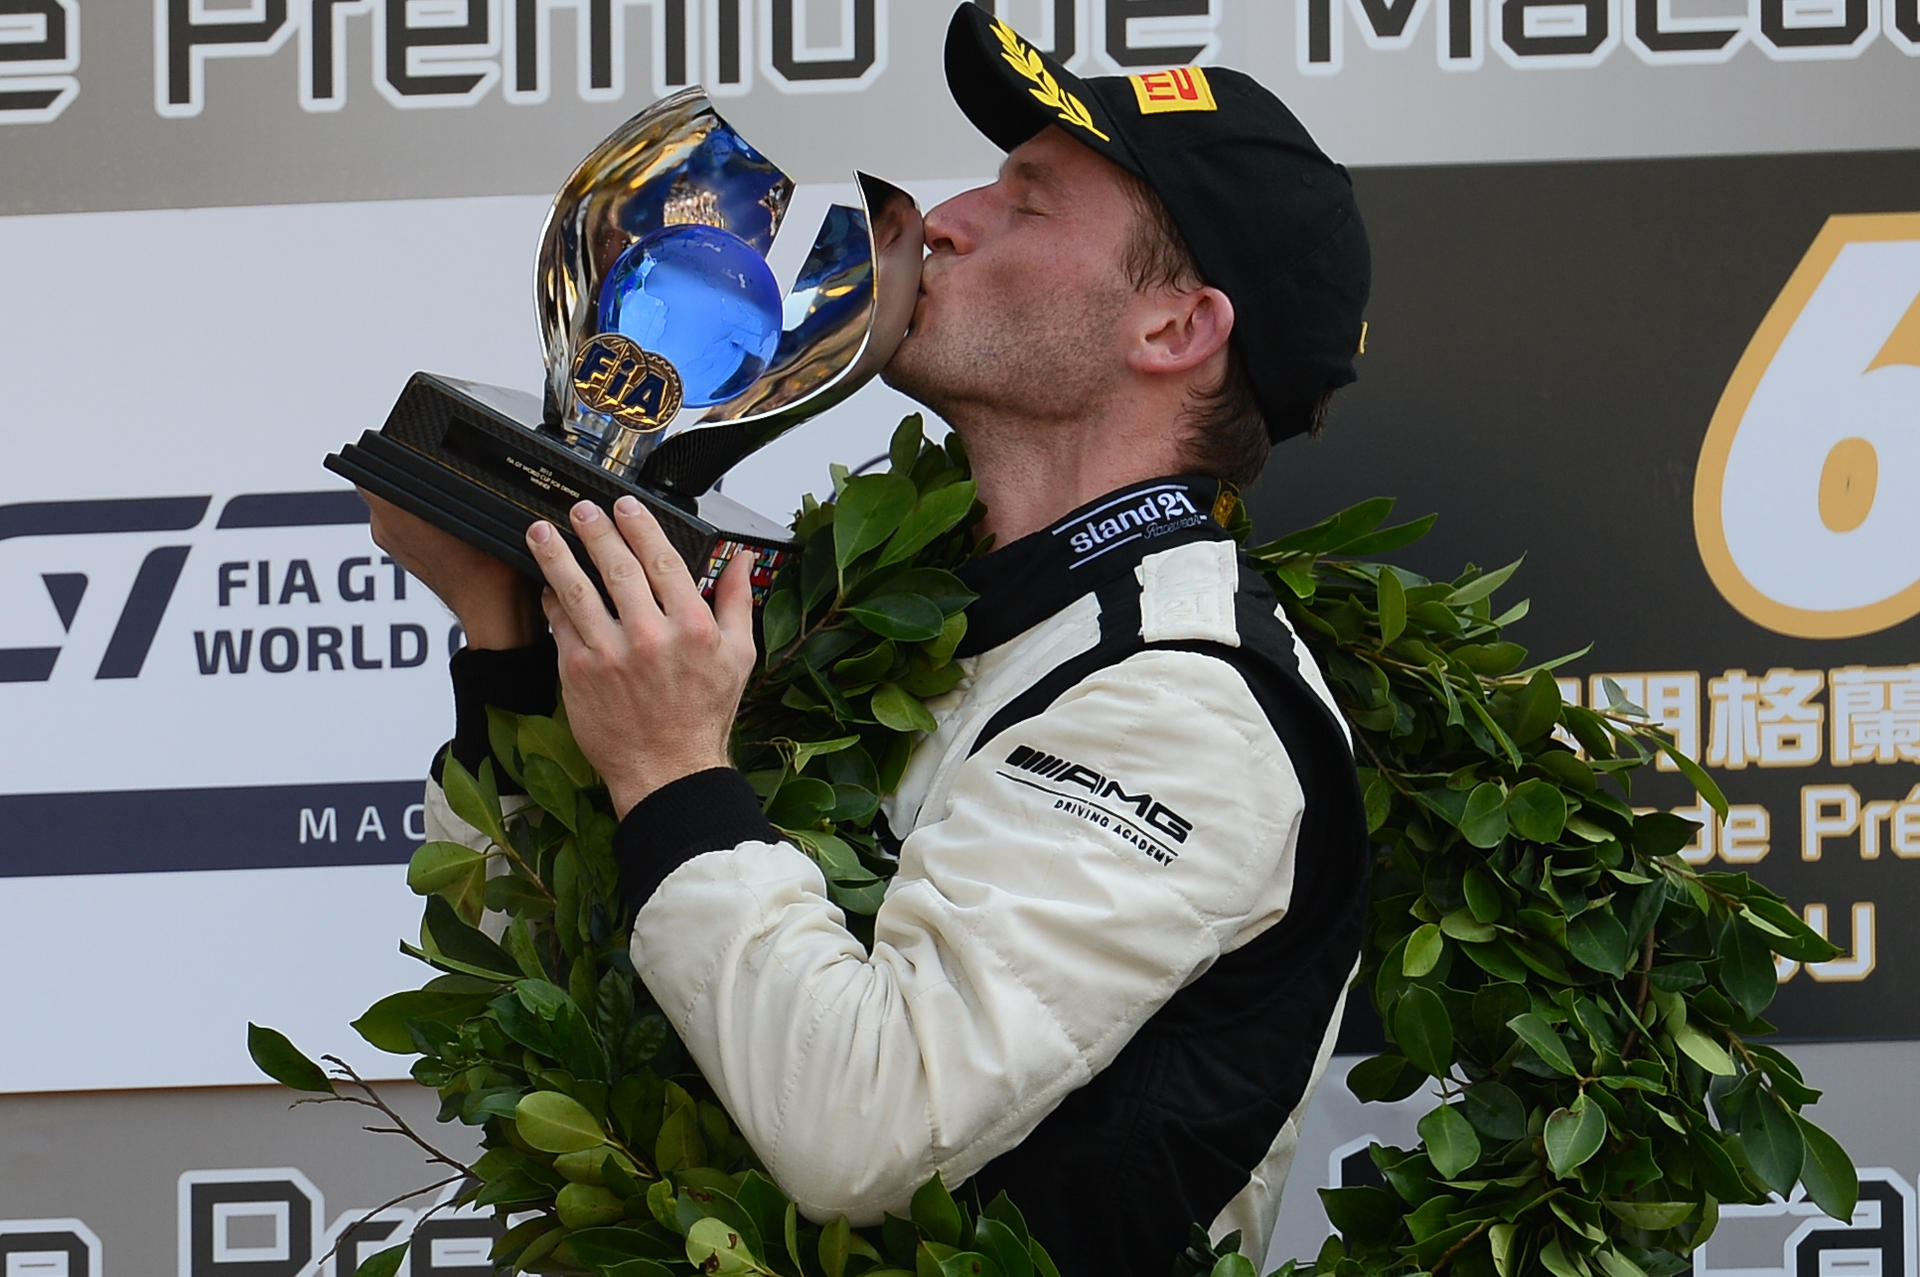 Maro Engel kisses the trophy after his win. Photo: Xinhua